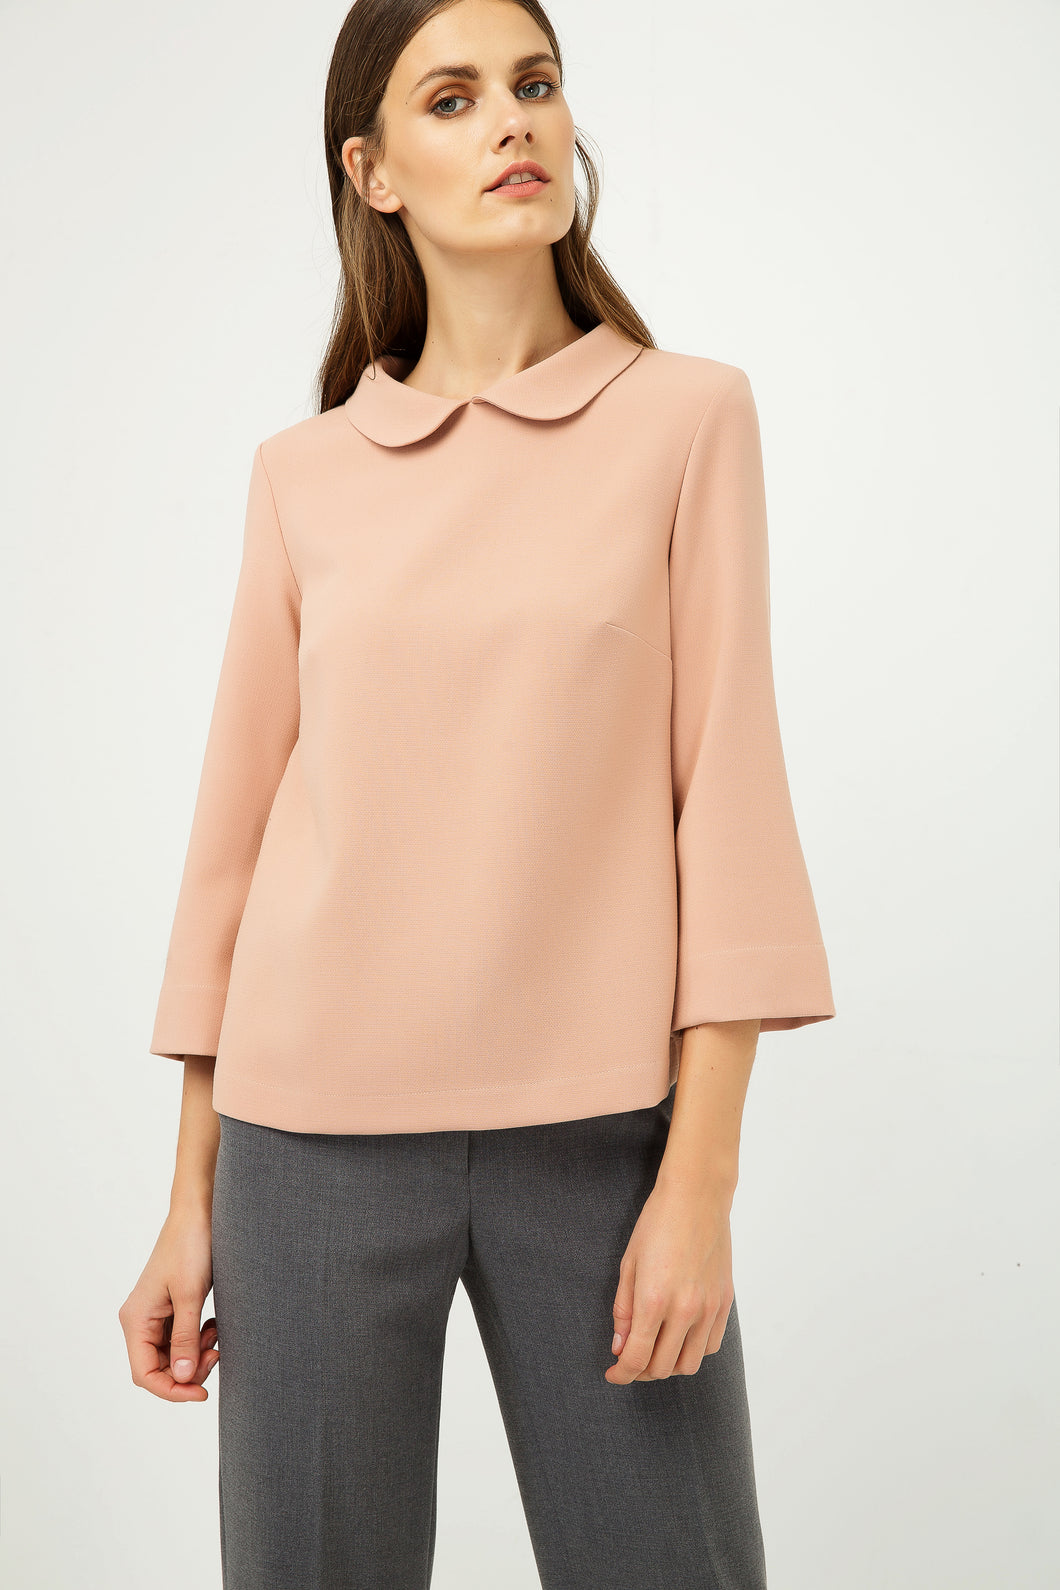 Bell Sleeve Peach Top with Peter Pan Collar